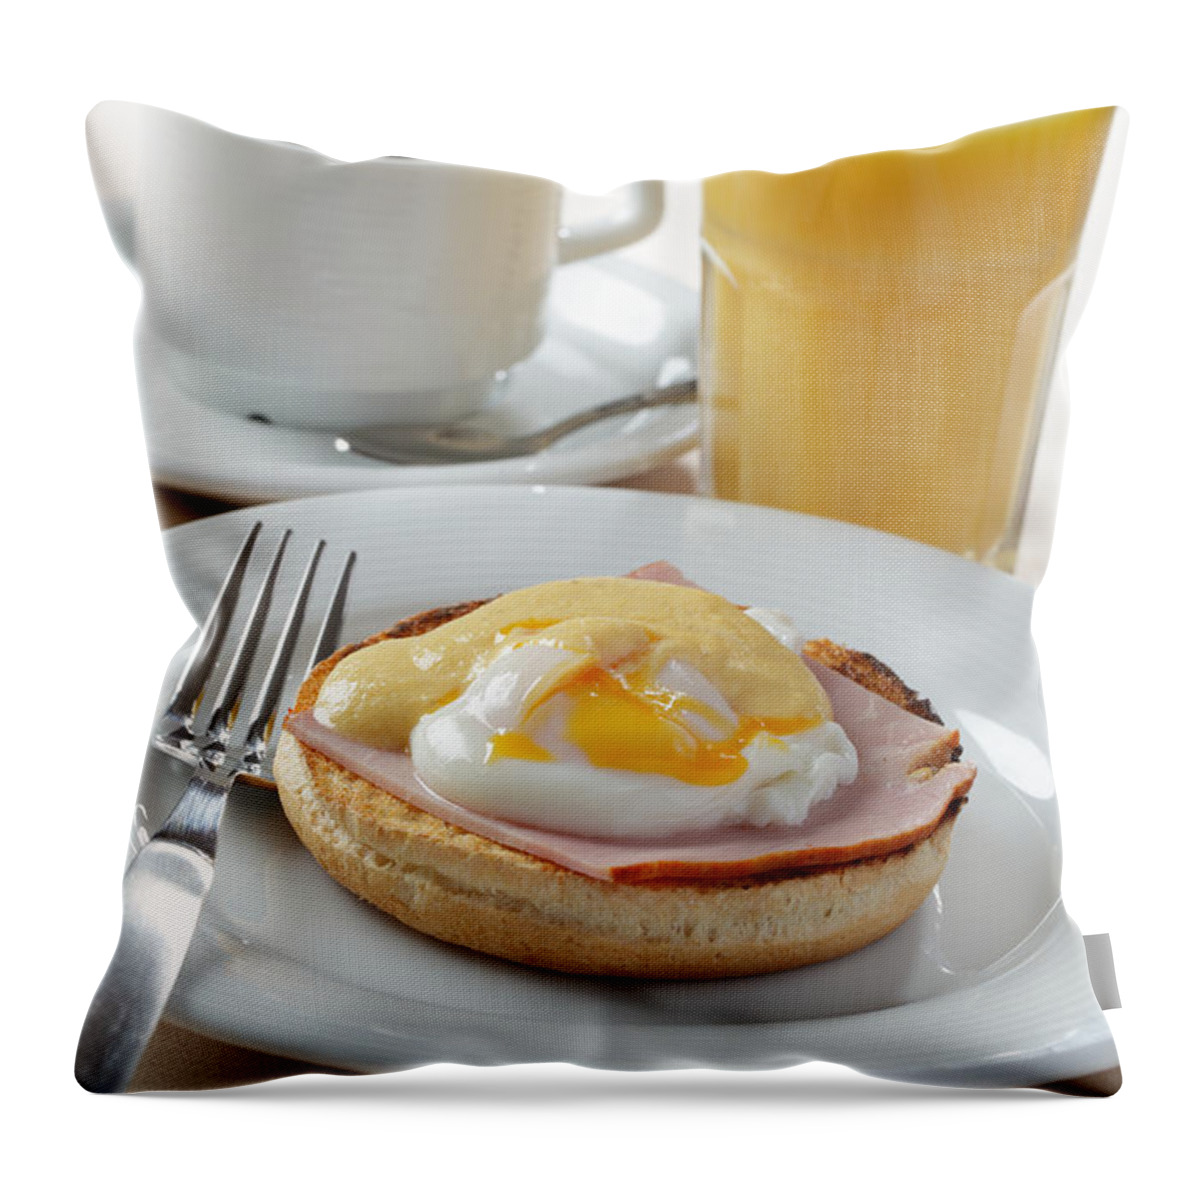 Breakfast Throw Pillow featuring the photograph Egg Benedict With Coffee And Orange by Lilyana Vinogradova